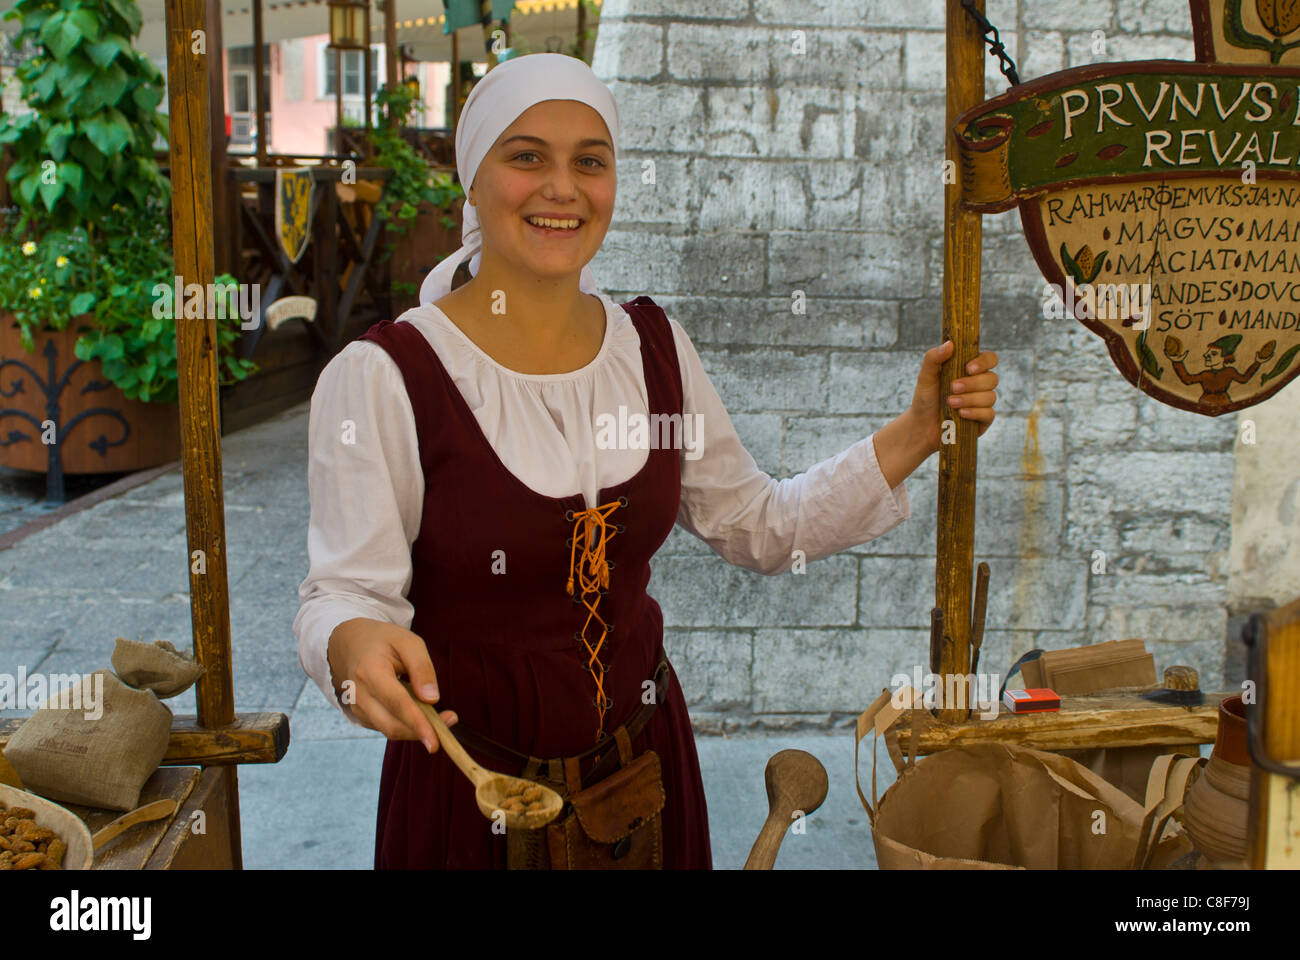 Traditionally dressed girl selling stuff from the Middle Ages, Tallinn, Estonia, Baltic States Stock Photo